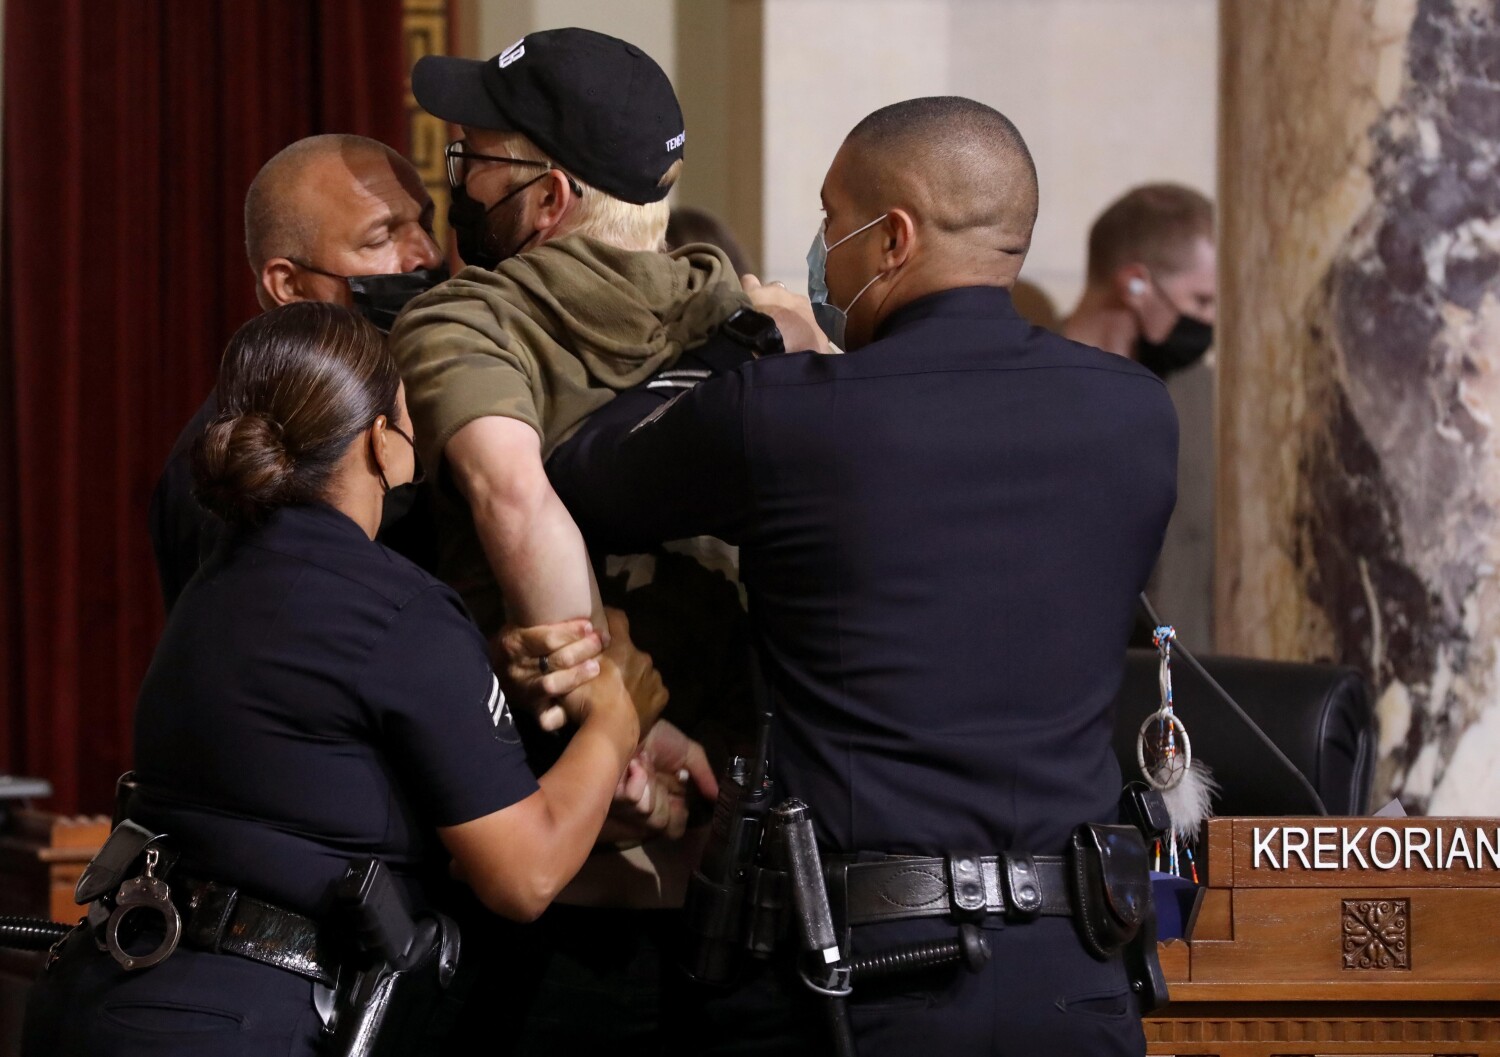 L.A. City Council meeting erupts in chaos, with two audience members arrested